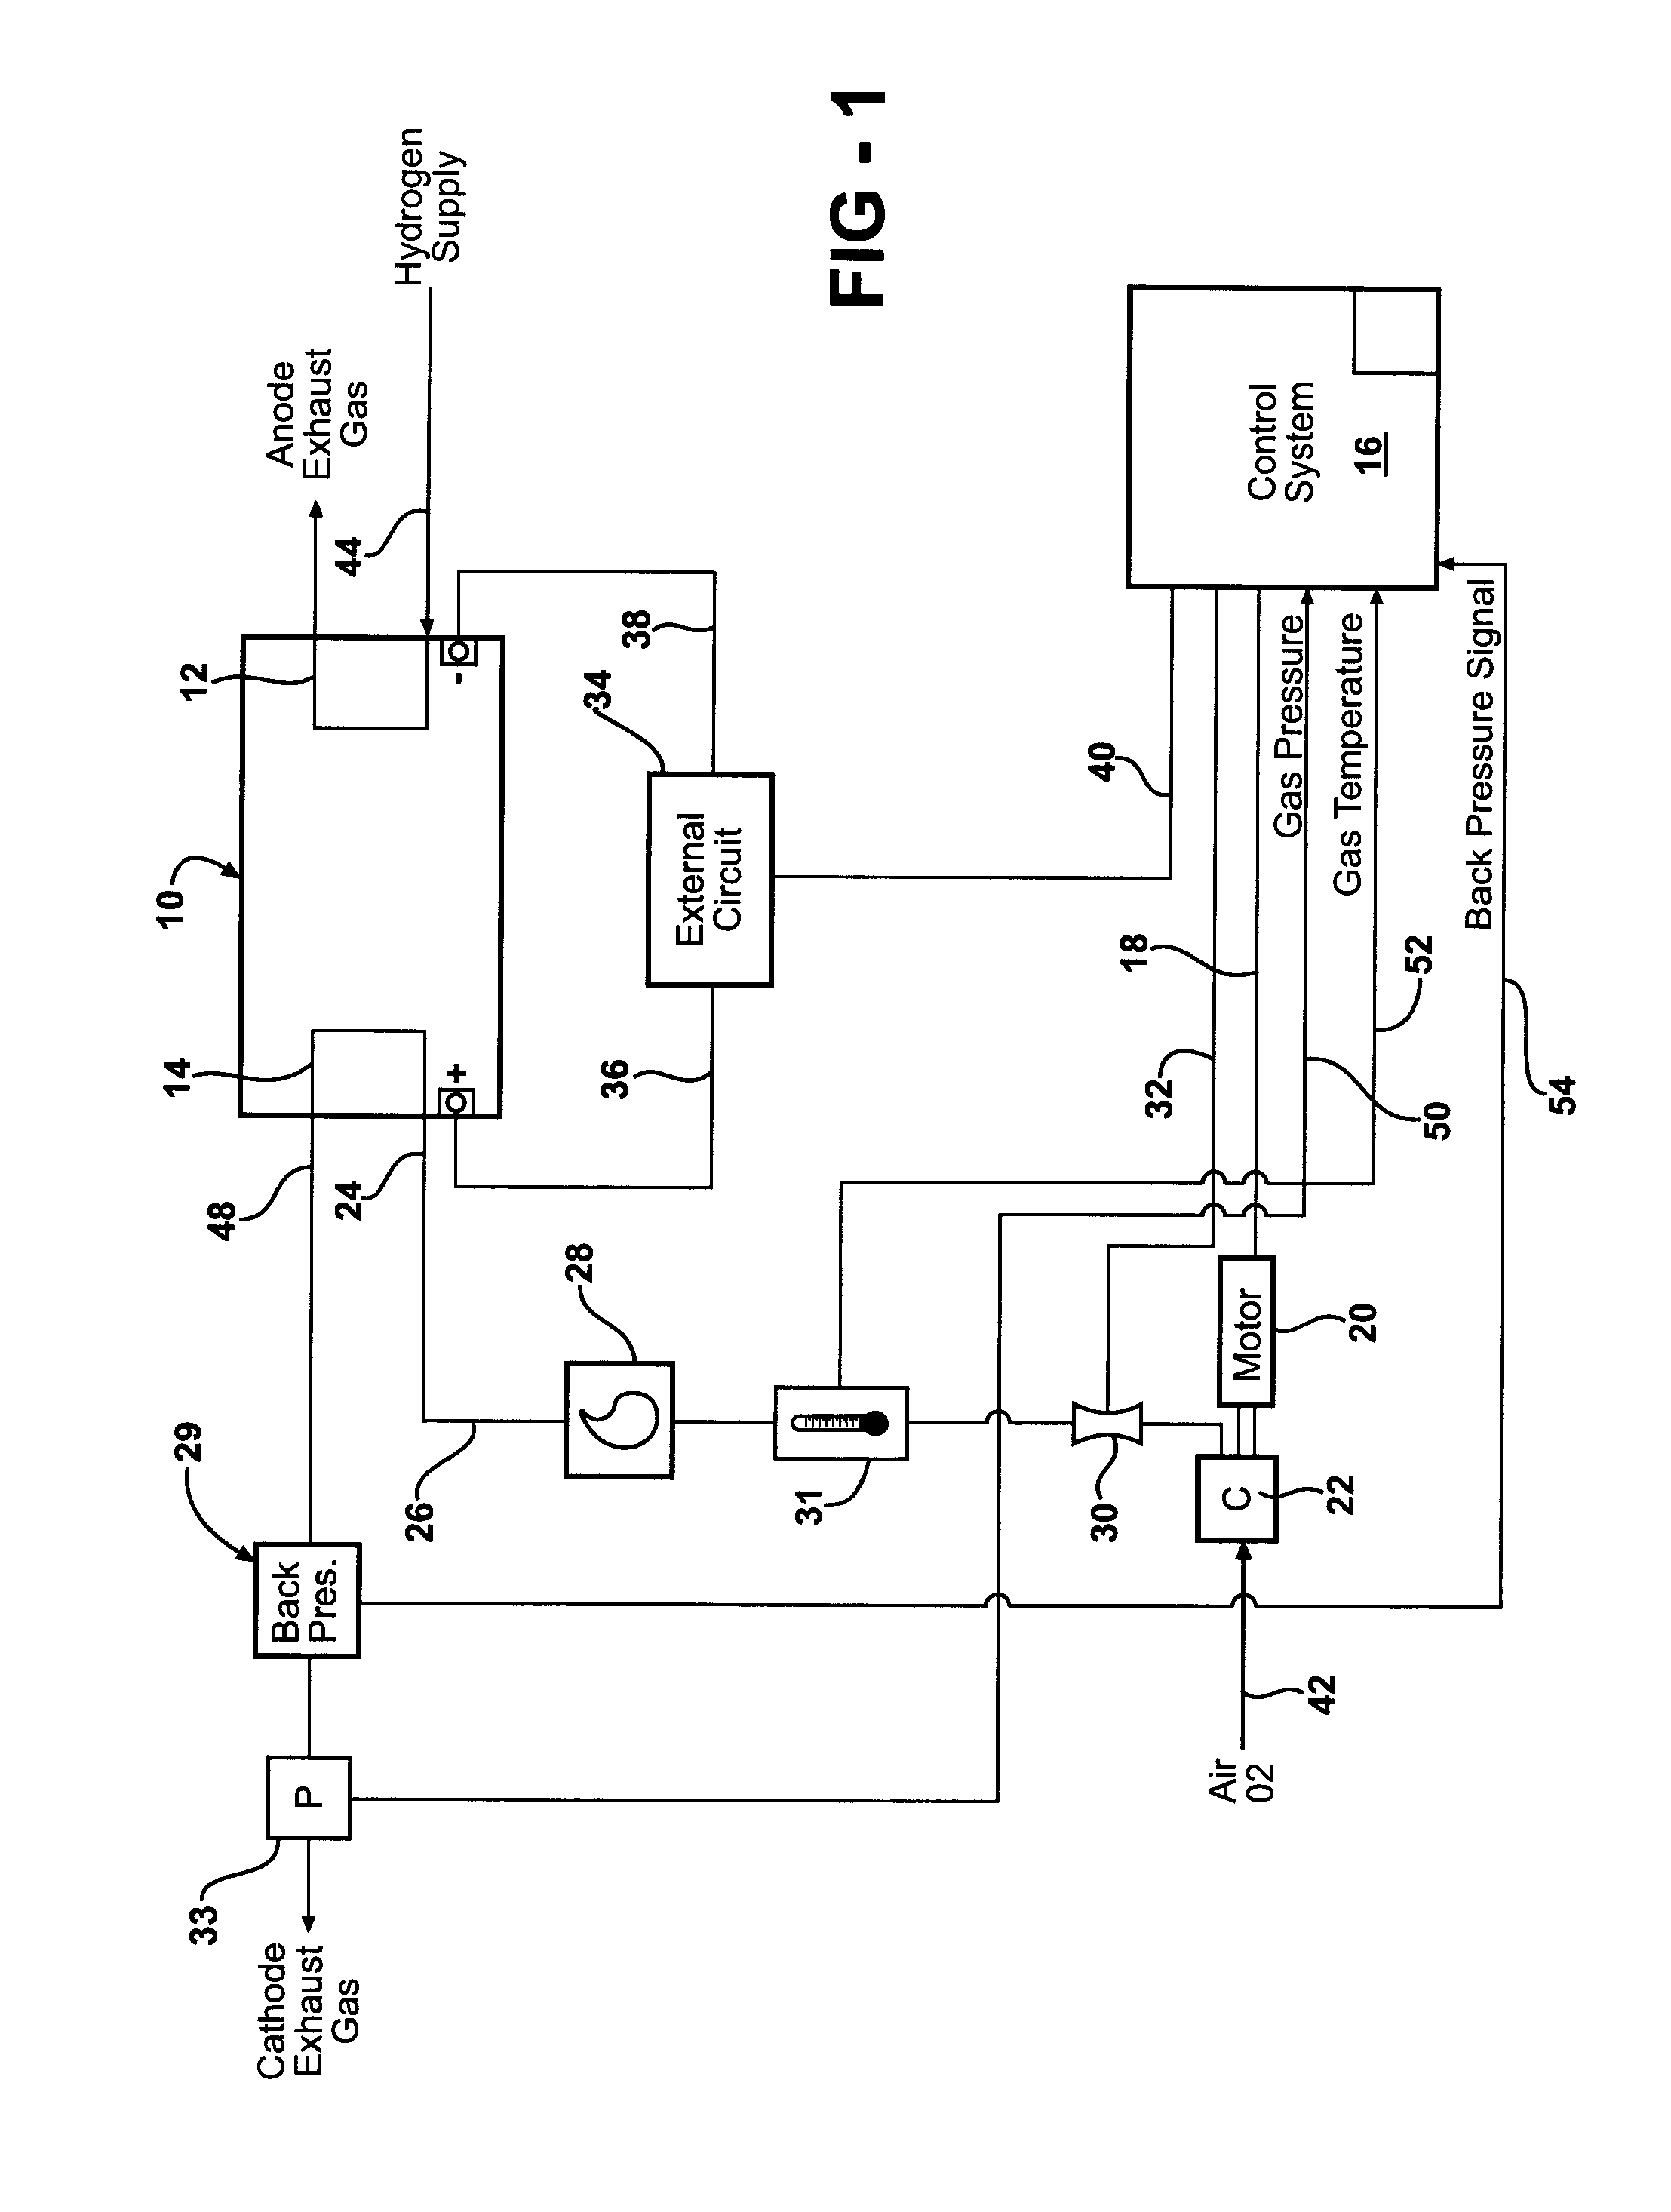 Method for managing fuel cell power increases using air flow feedback delay